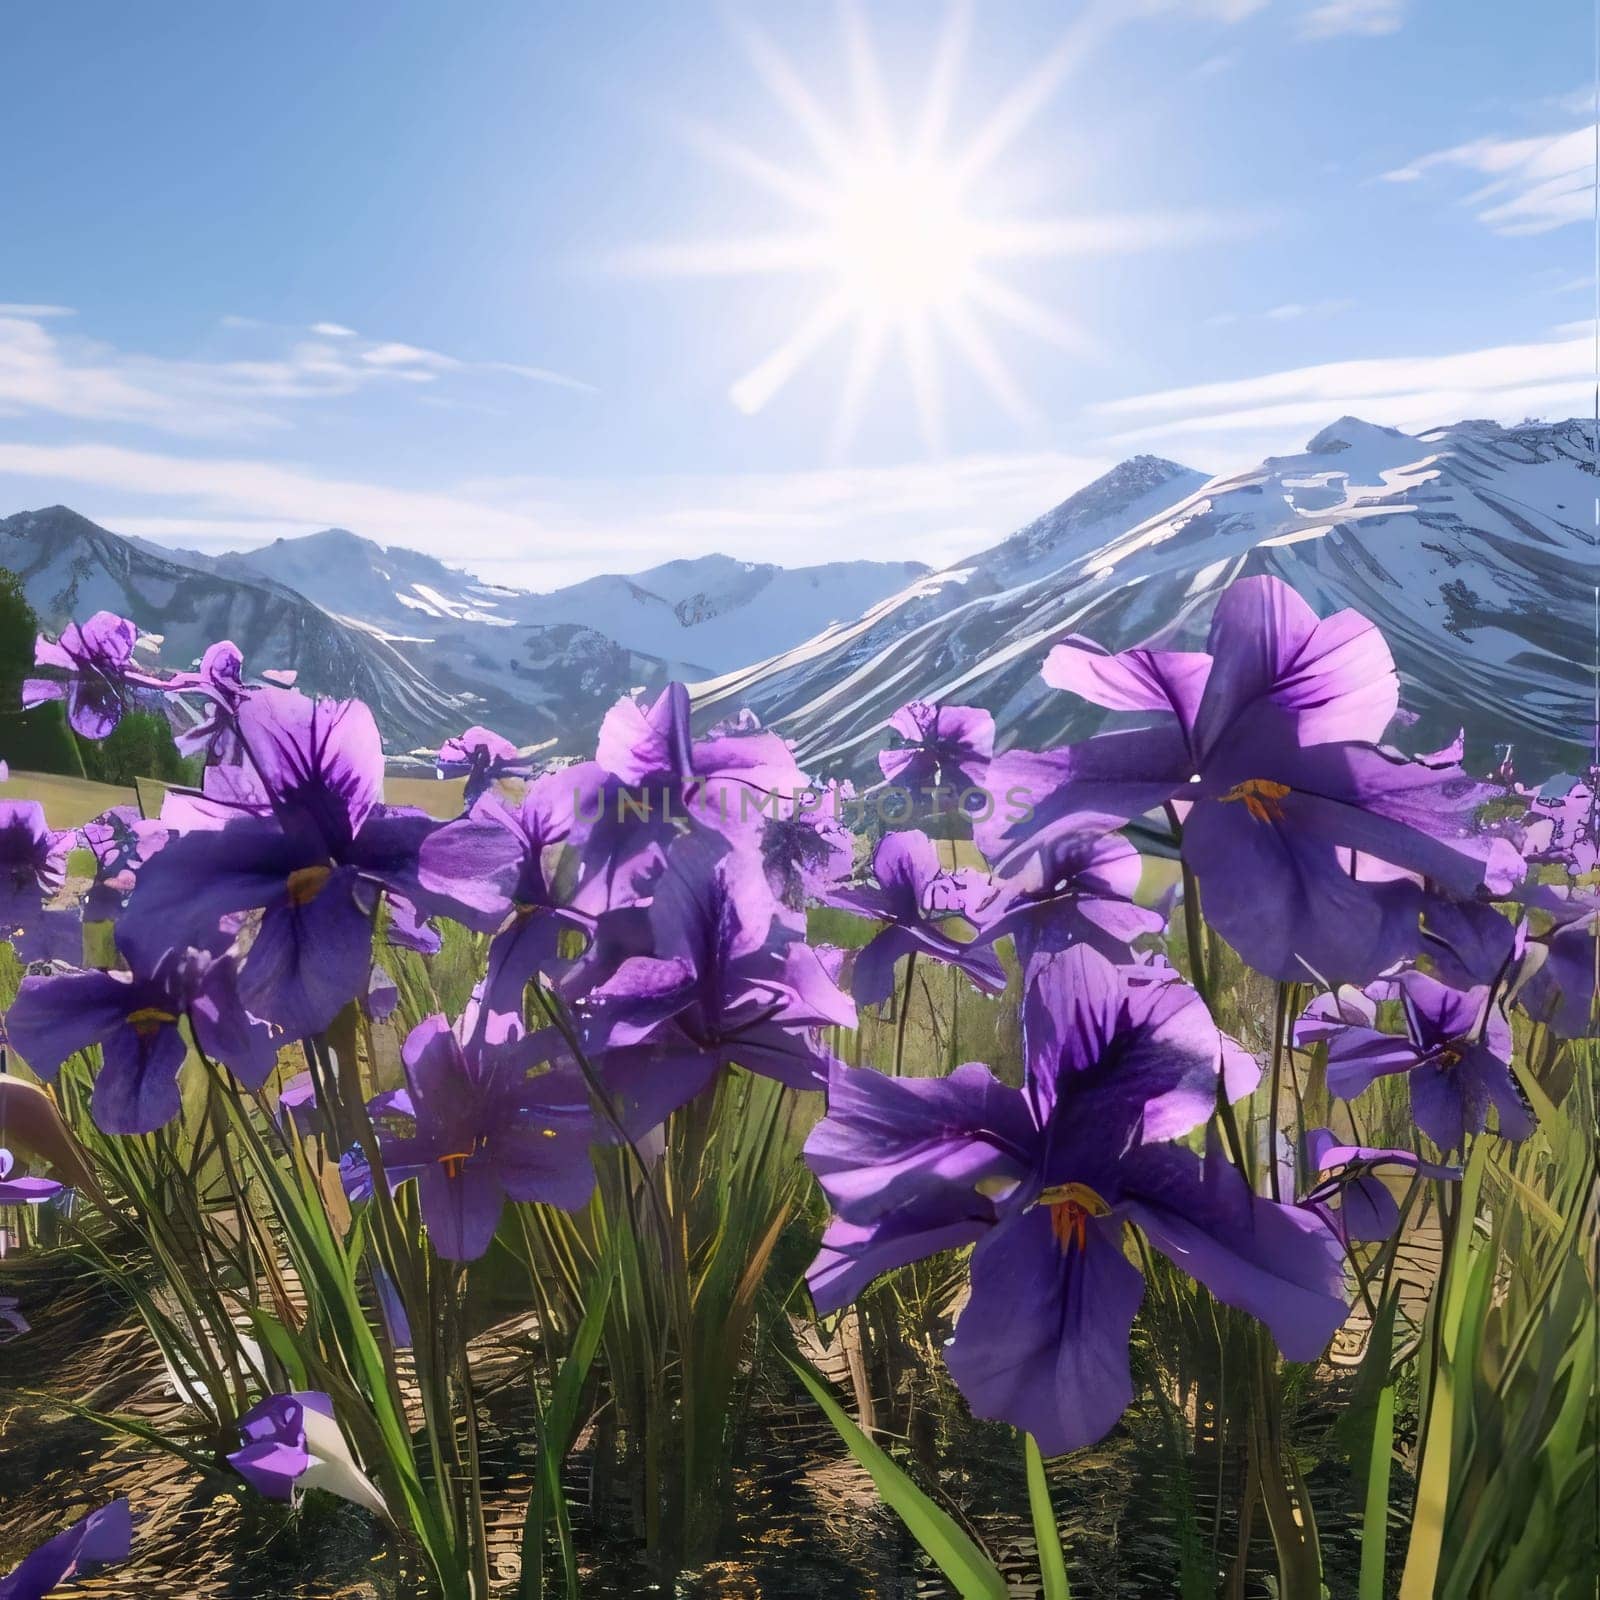 Purple flowers with Green stems kami in the meadow in the background high mountain ranges covered with snow. Flowering flowers, a symbol of spring, new life. by ThemesS